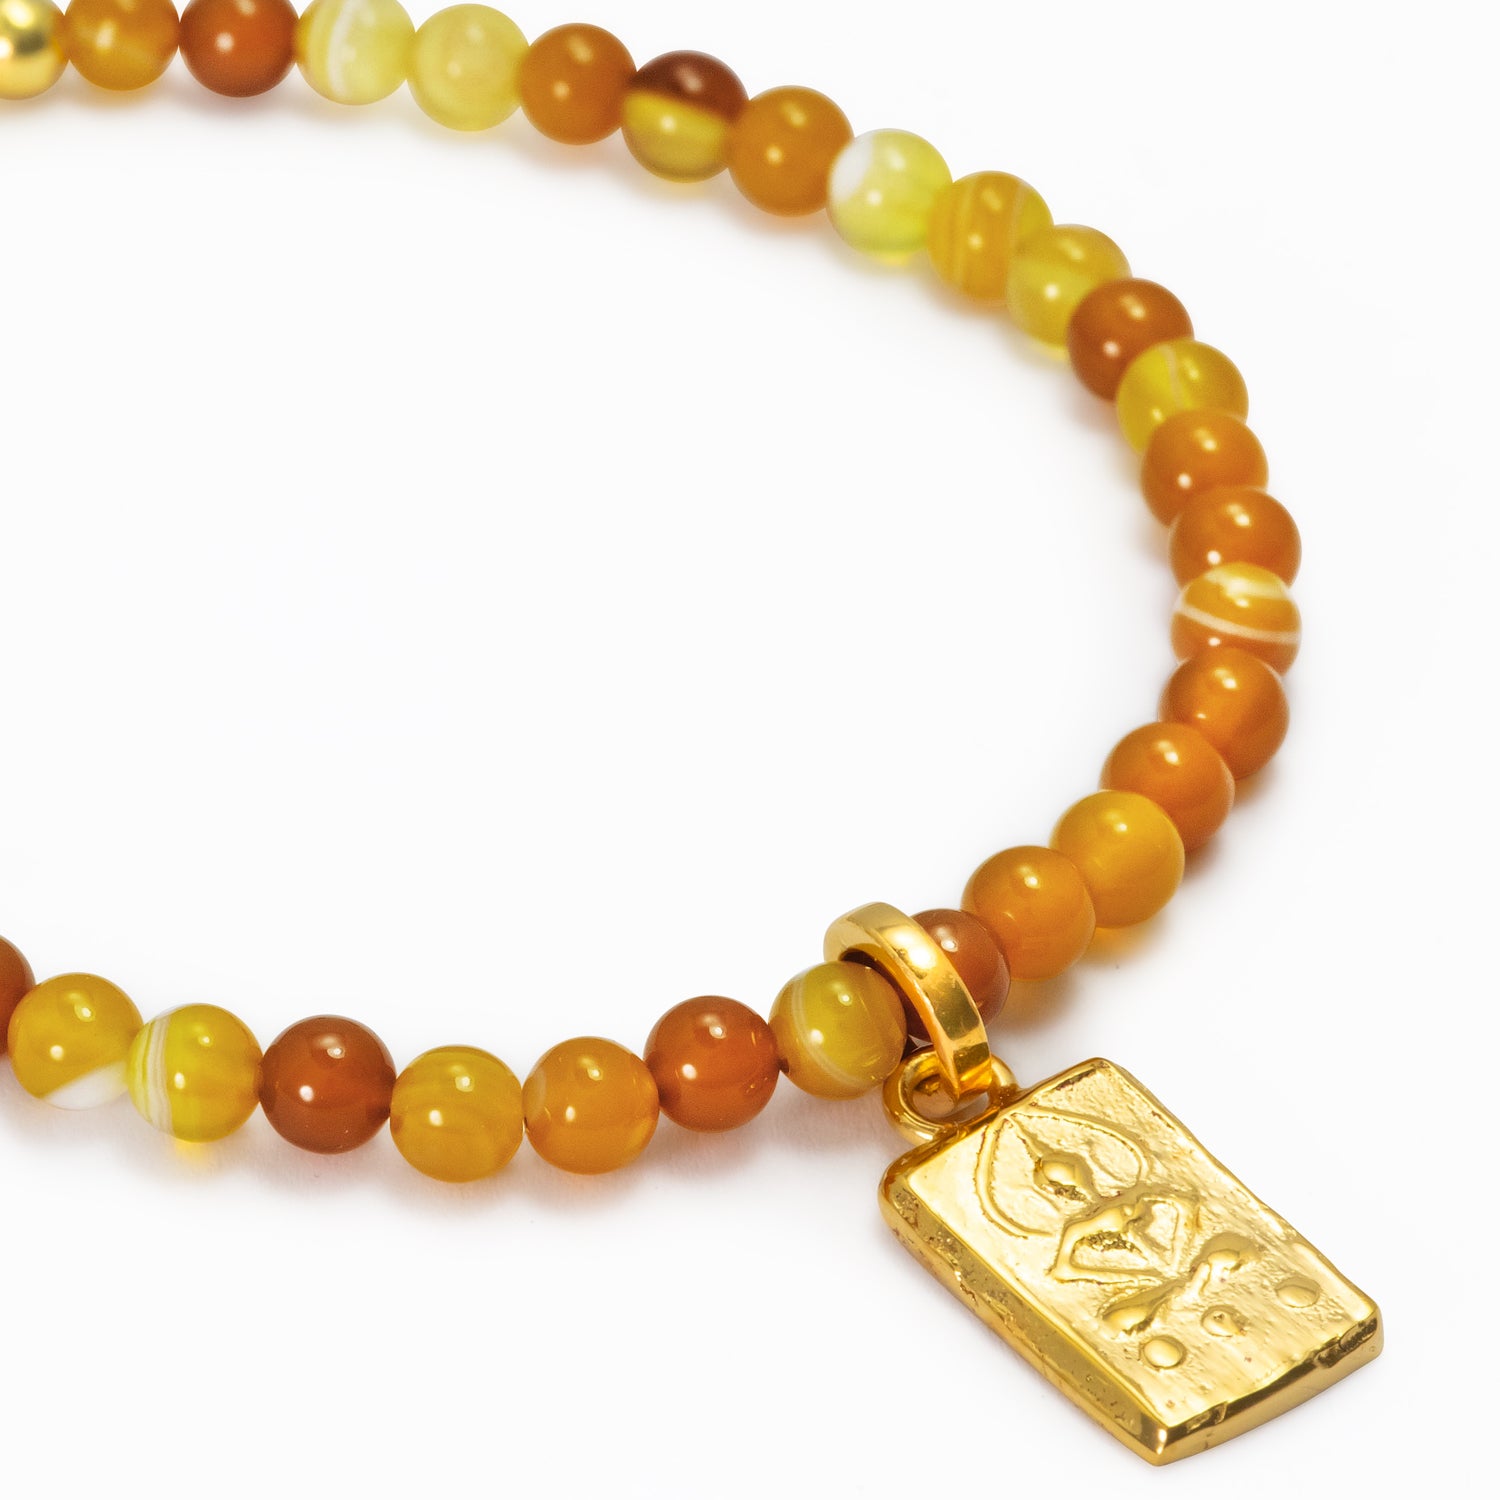 Buddha gemstone bracelet with calcite gold plated by ETERNAL BLISS - Spiritual jewelry